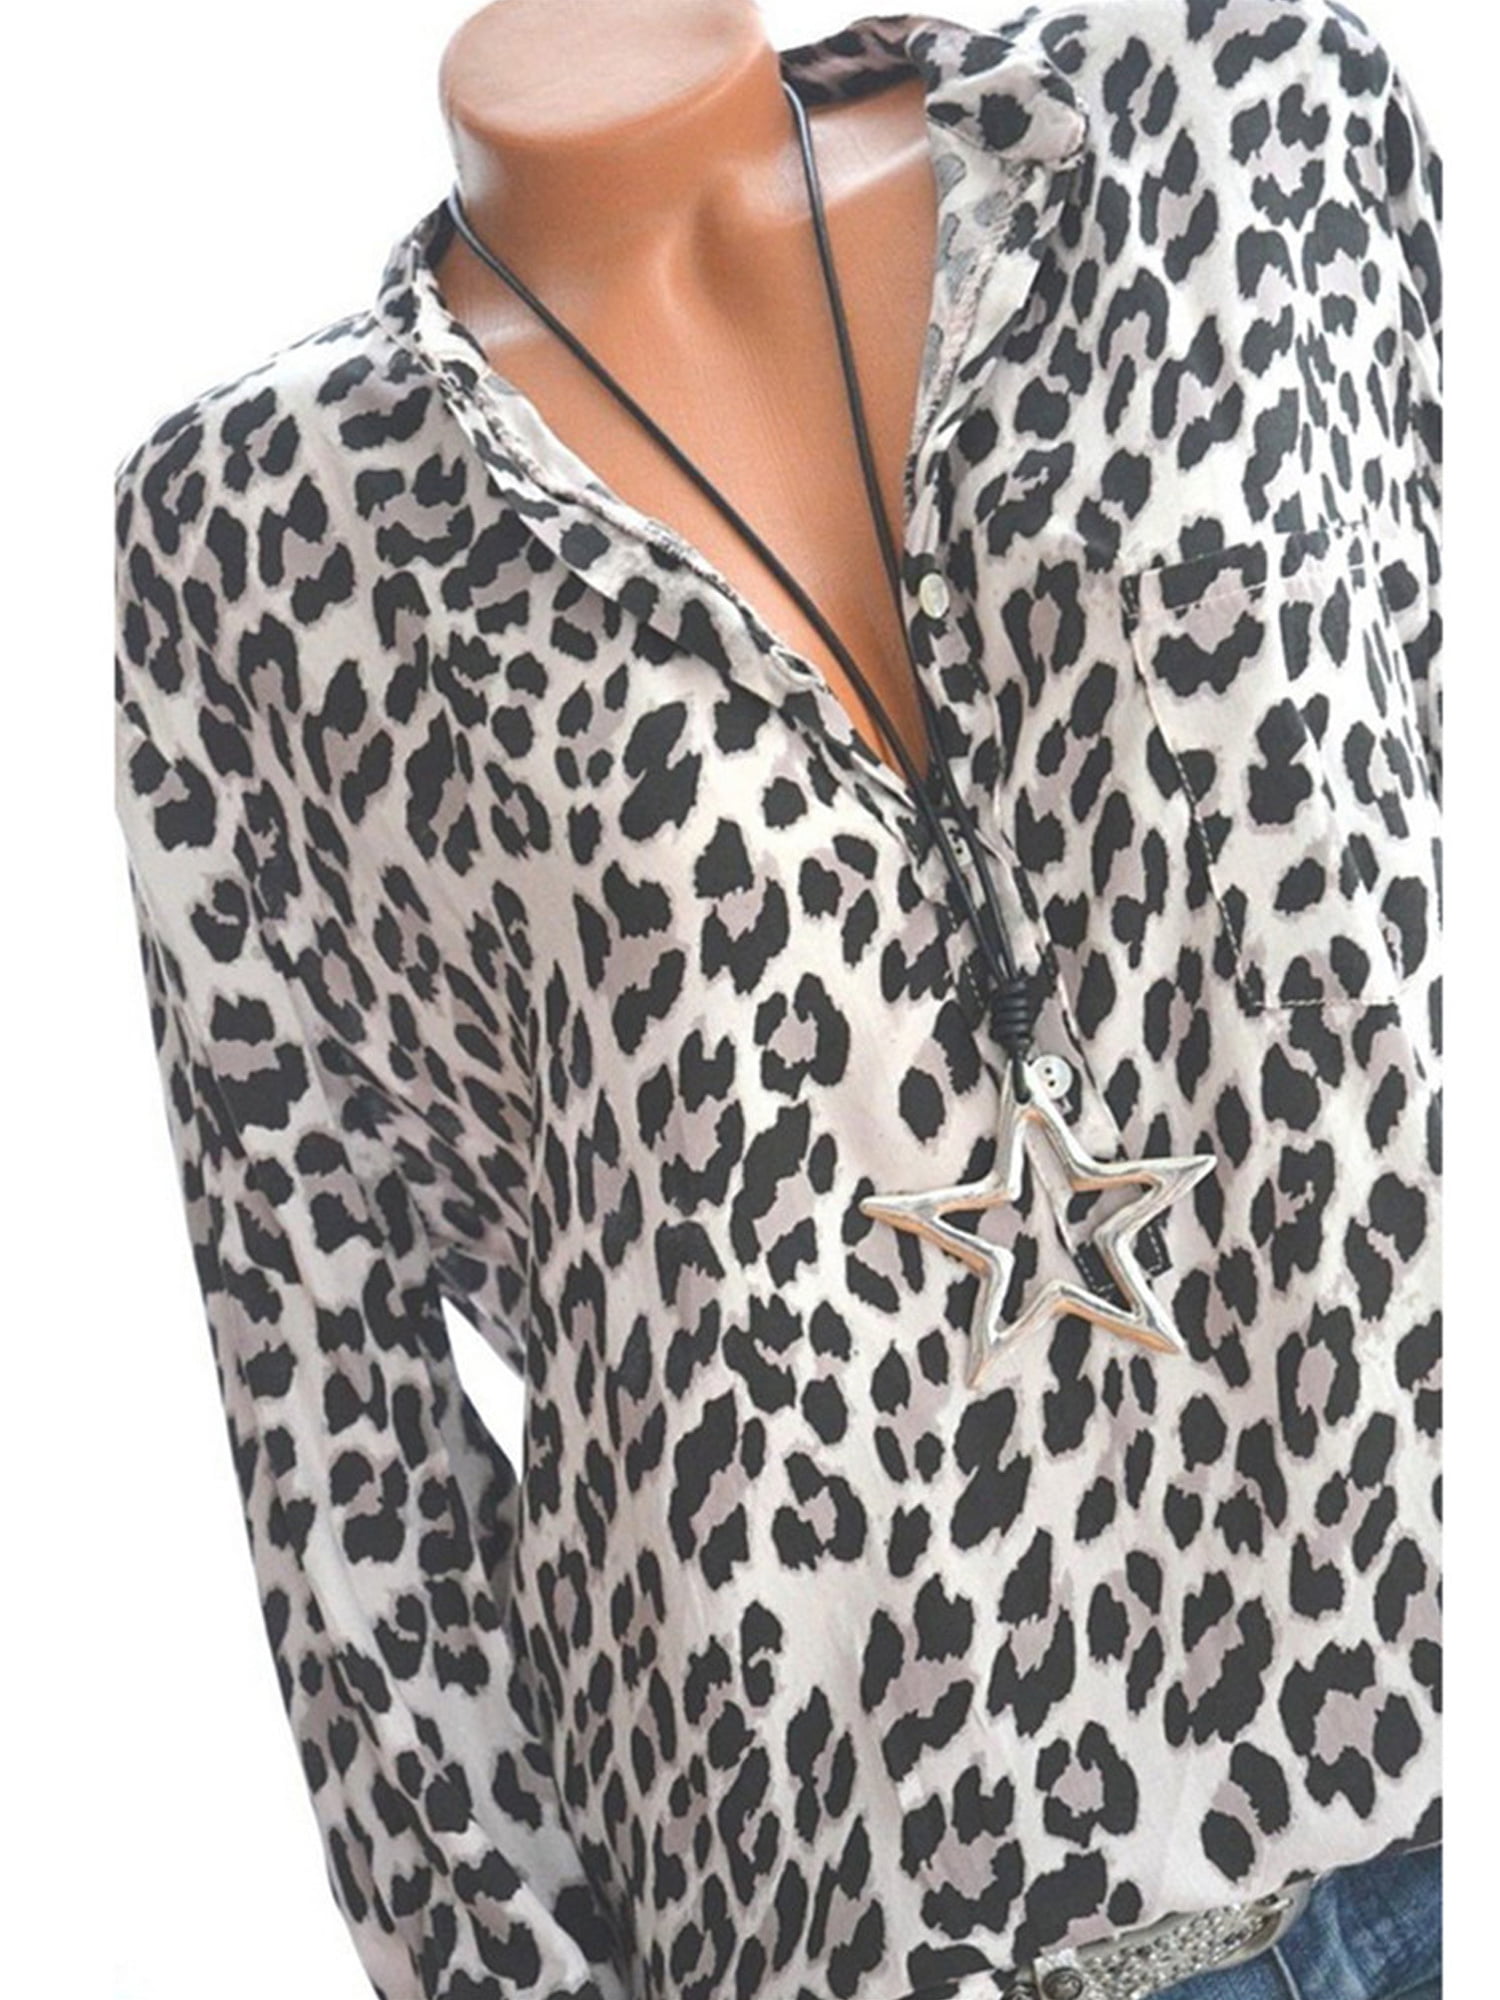 Womens Leopard Blouse Ladies Casual Pocket Long Sleeve Tunic Jumper Shirt Tops